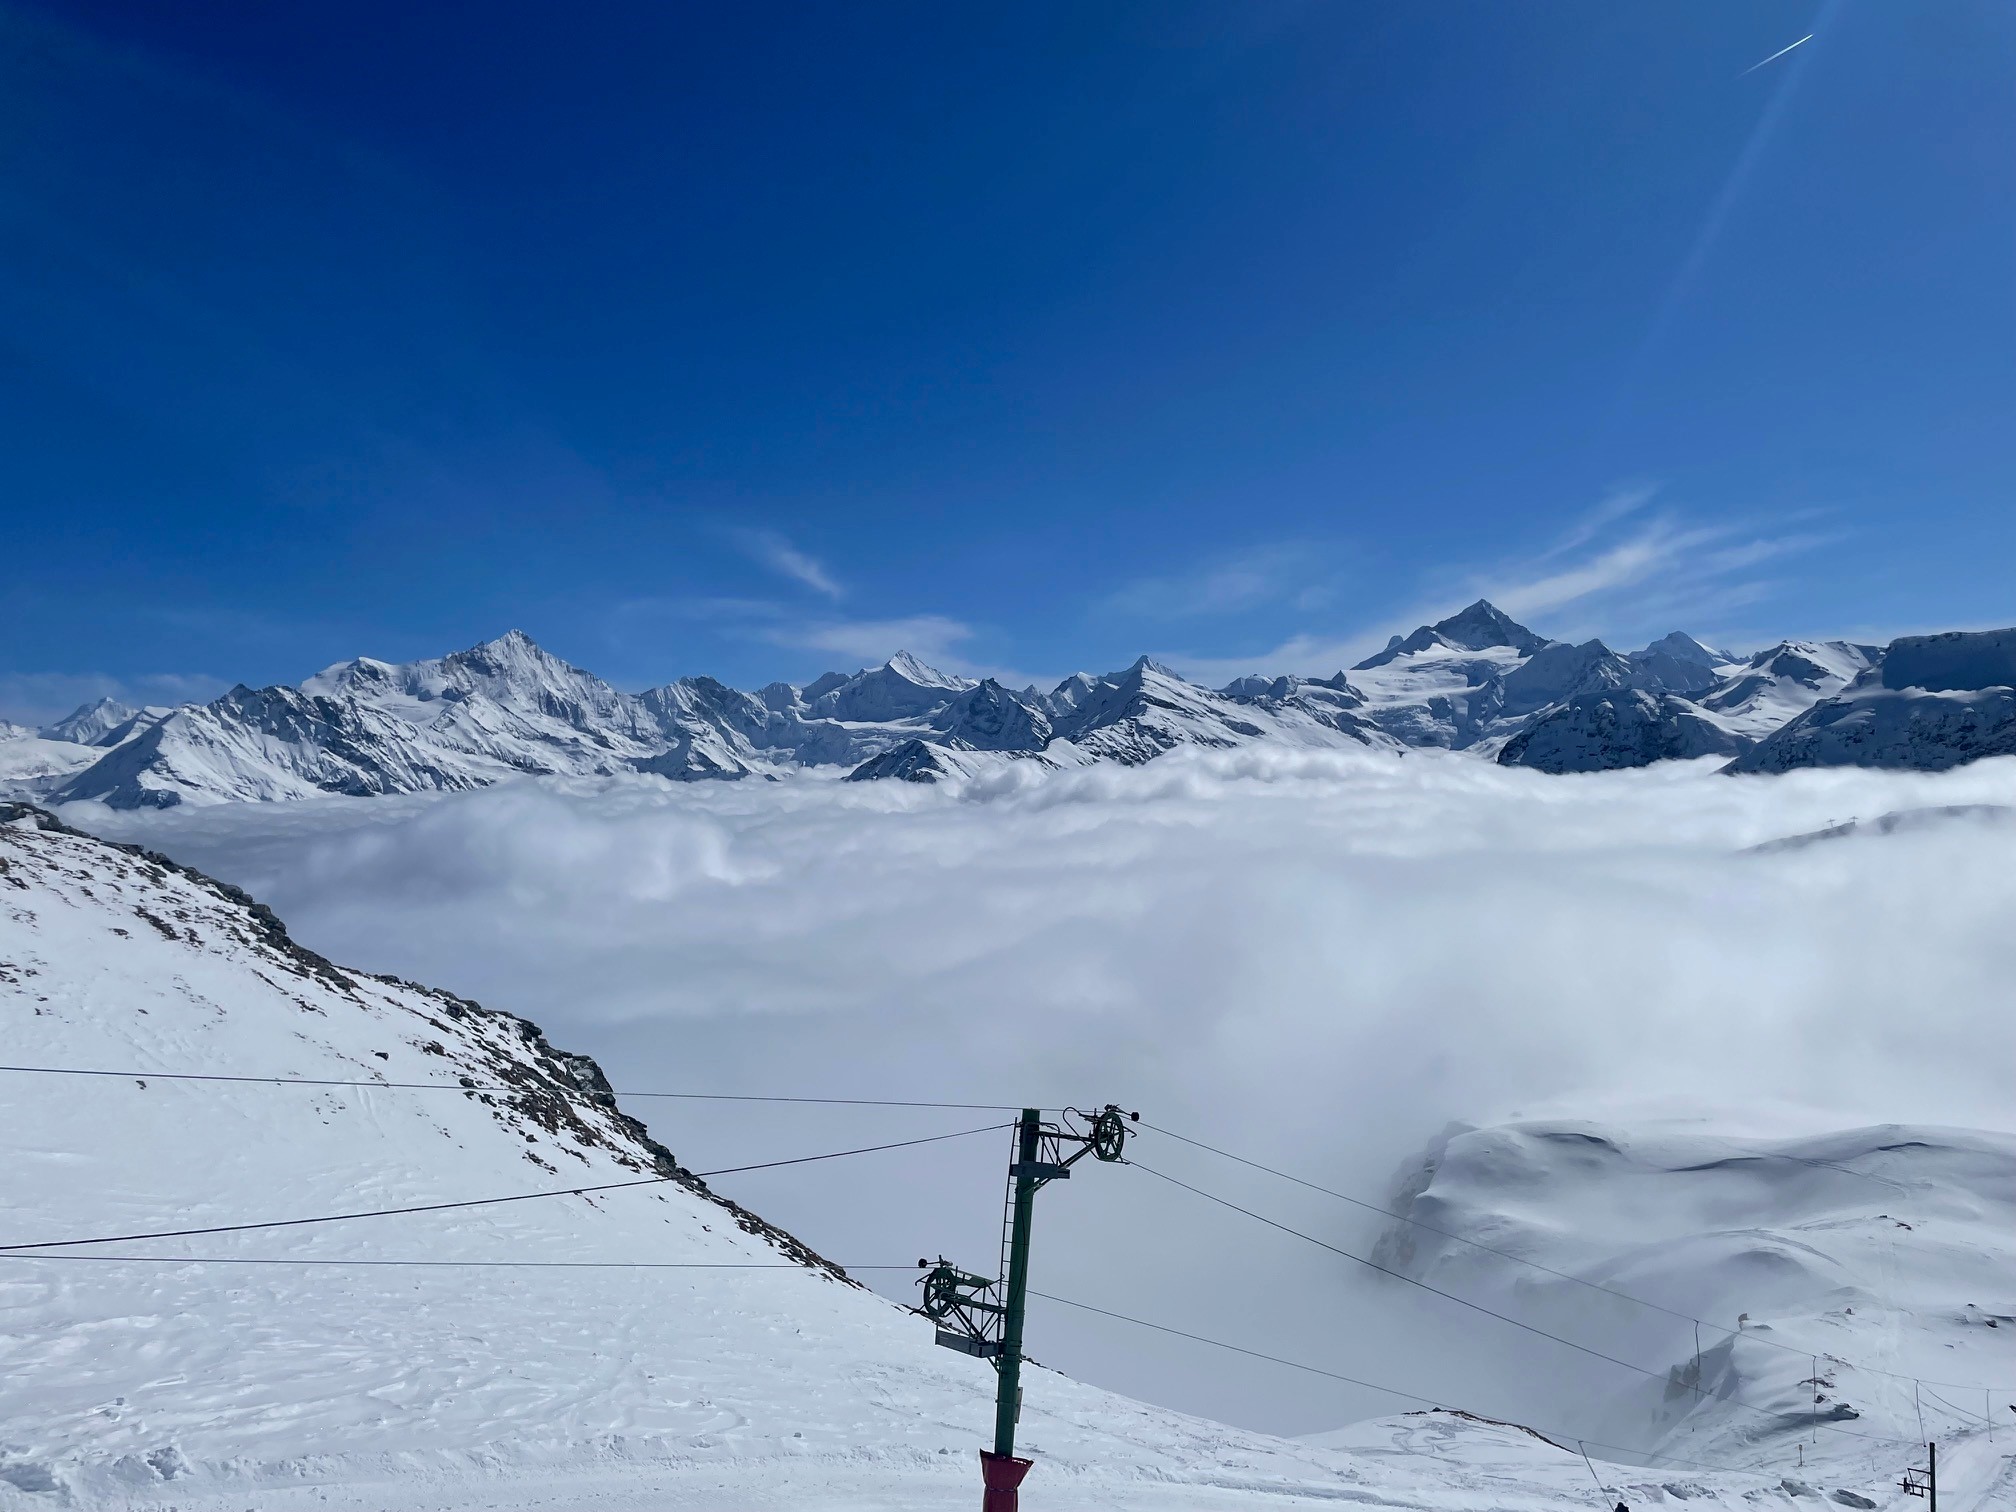 Amazing alps scenery above the clouds when the sun is out